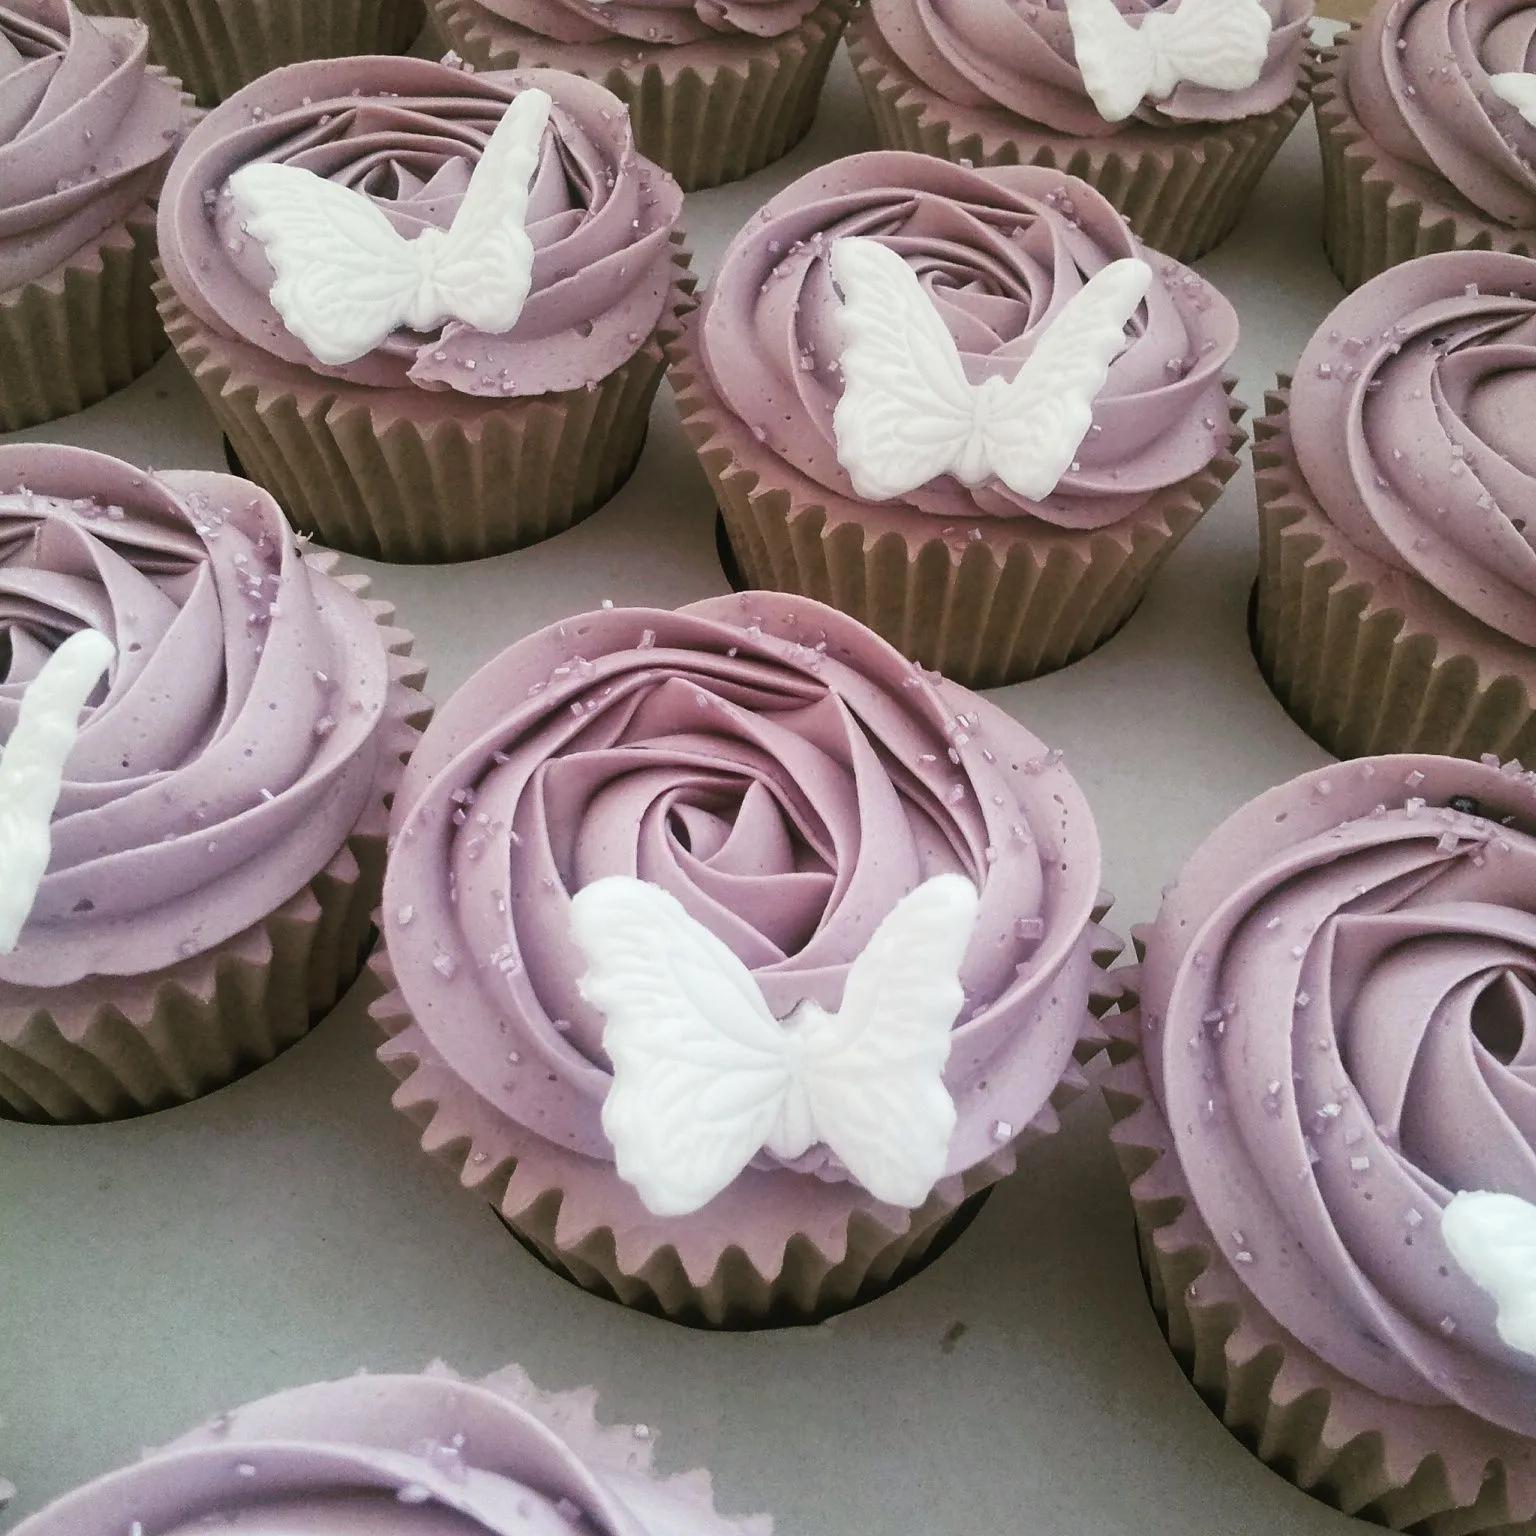 Butterfly, rose swirl cupcakes | Cupcake cakes, Pretty birthday cakes ...